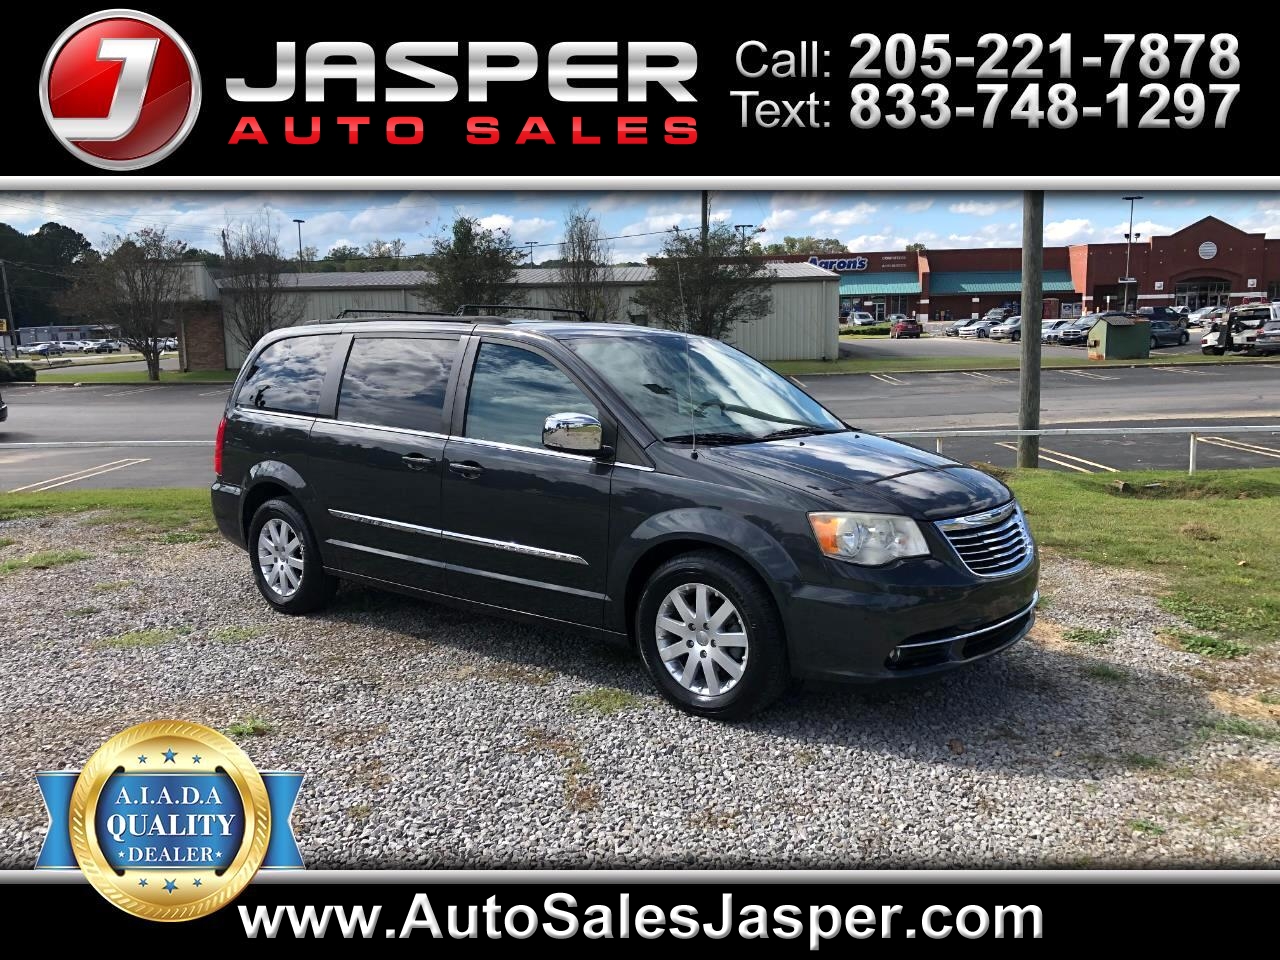 2011 Chrysler Town & Country TOURING L  - 714216A  - Jasper Auto Sales